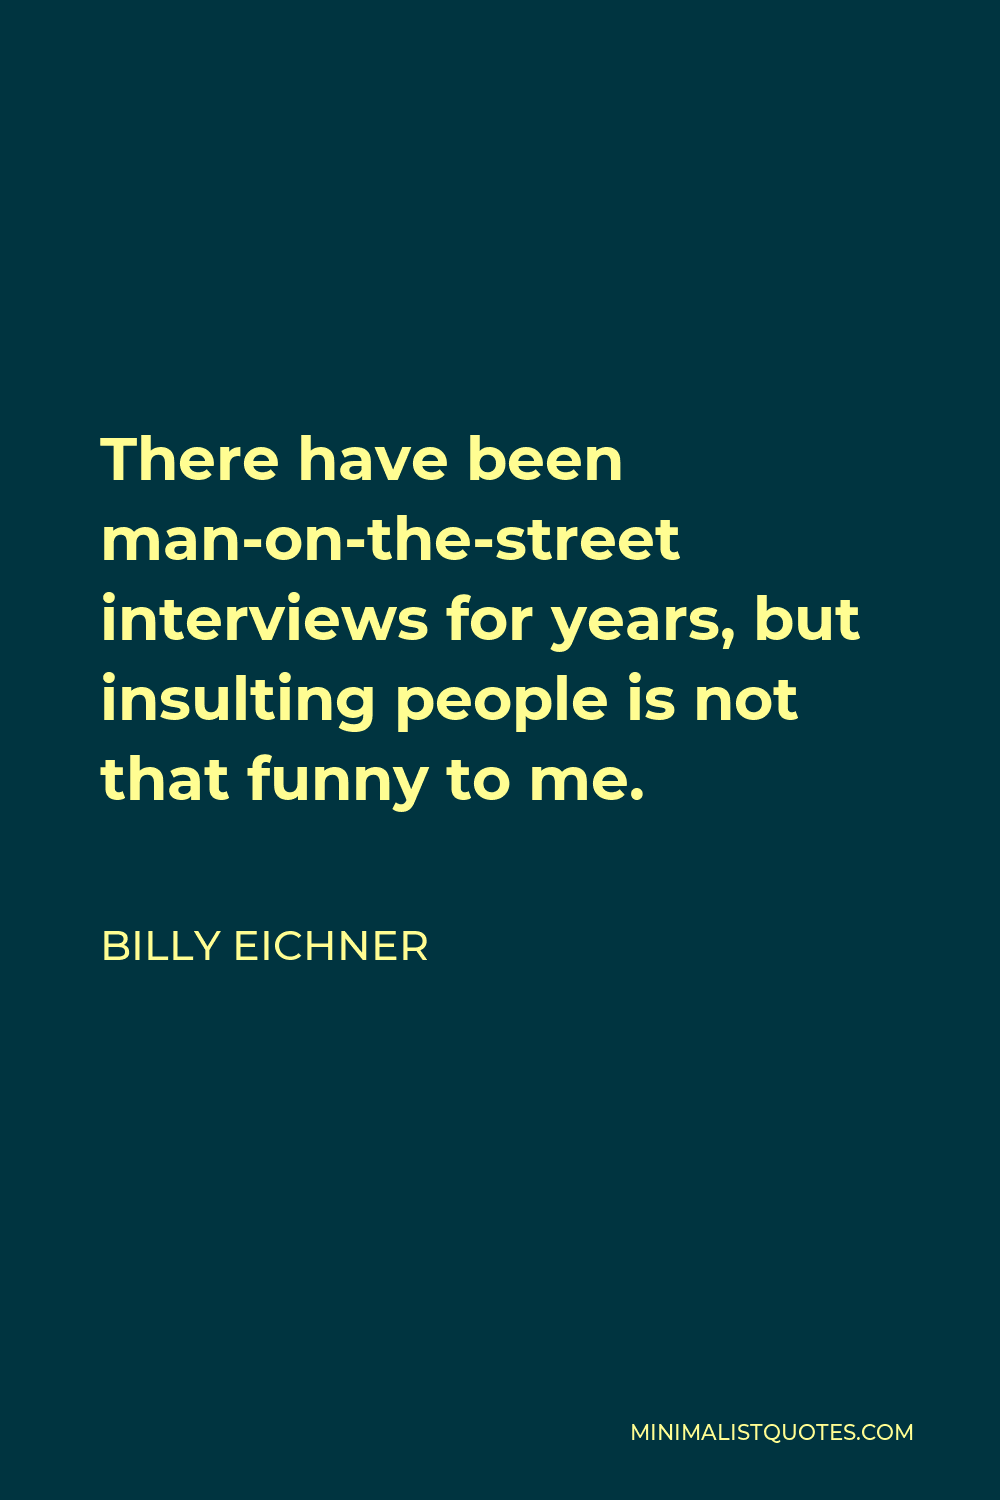 Billy Eichner Quote - There have been man-on-the-street interviews for years, but insulting people is not that funny to me.